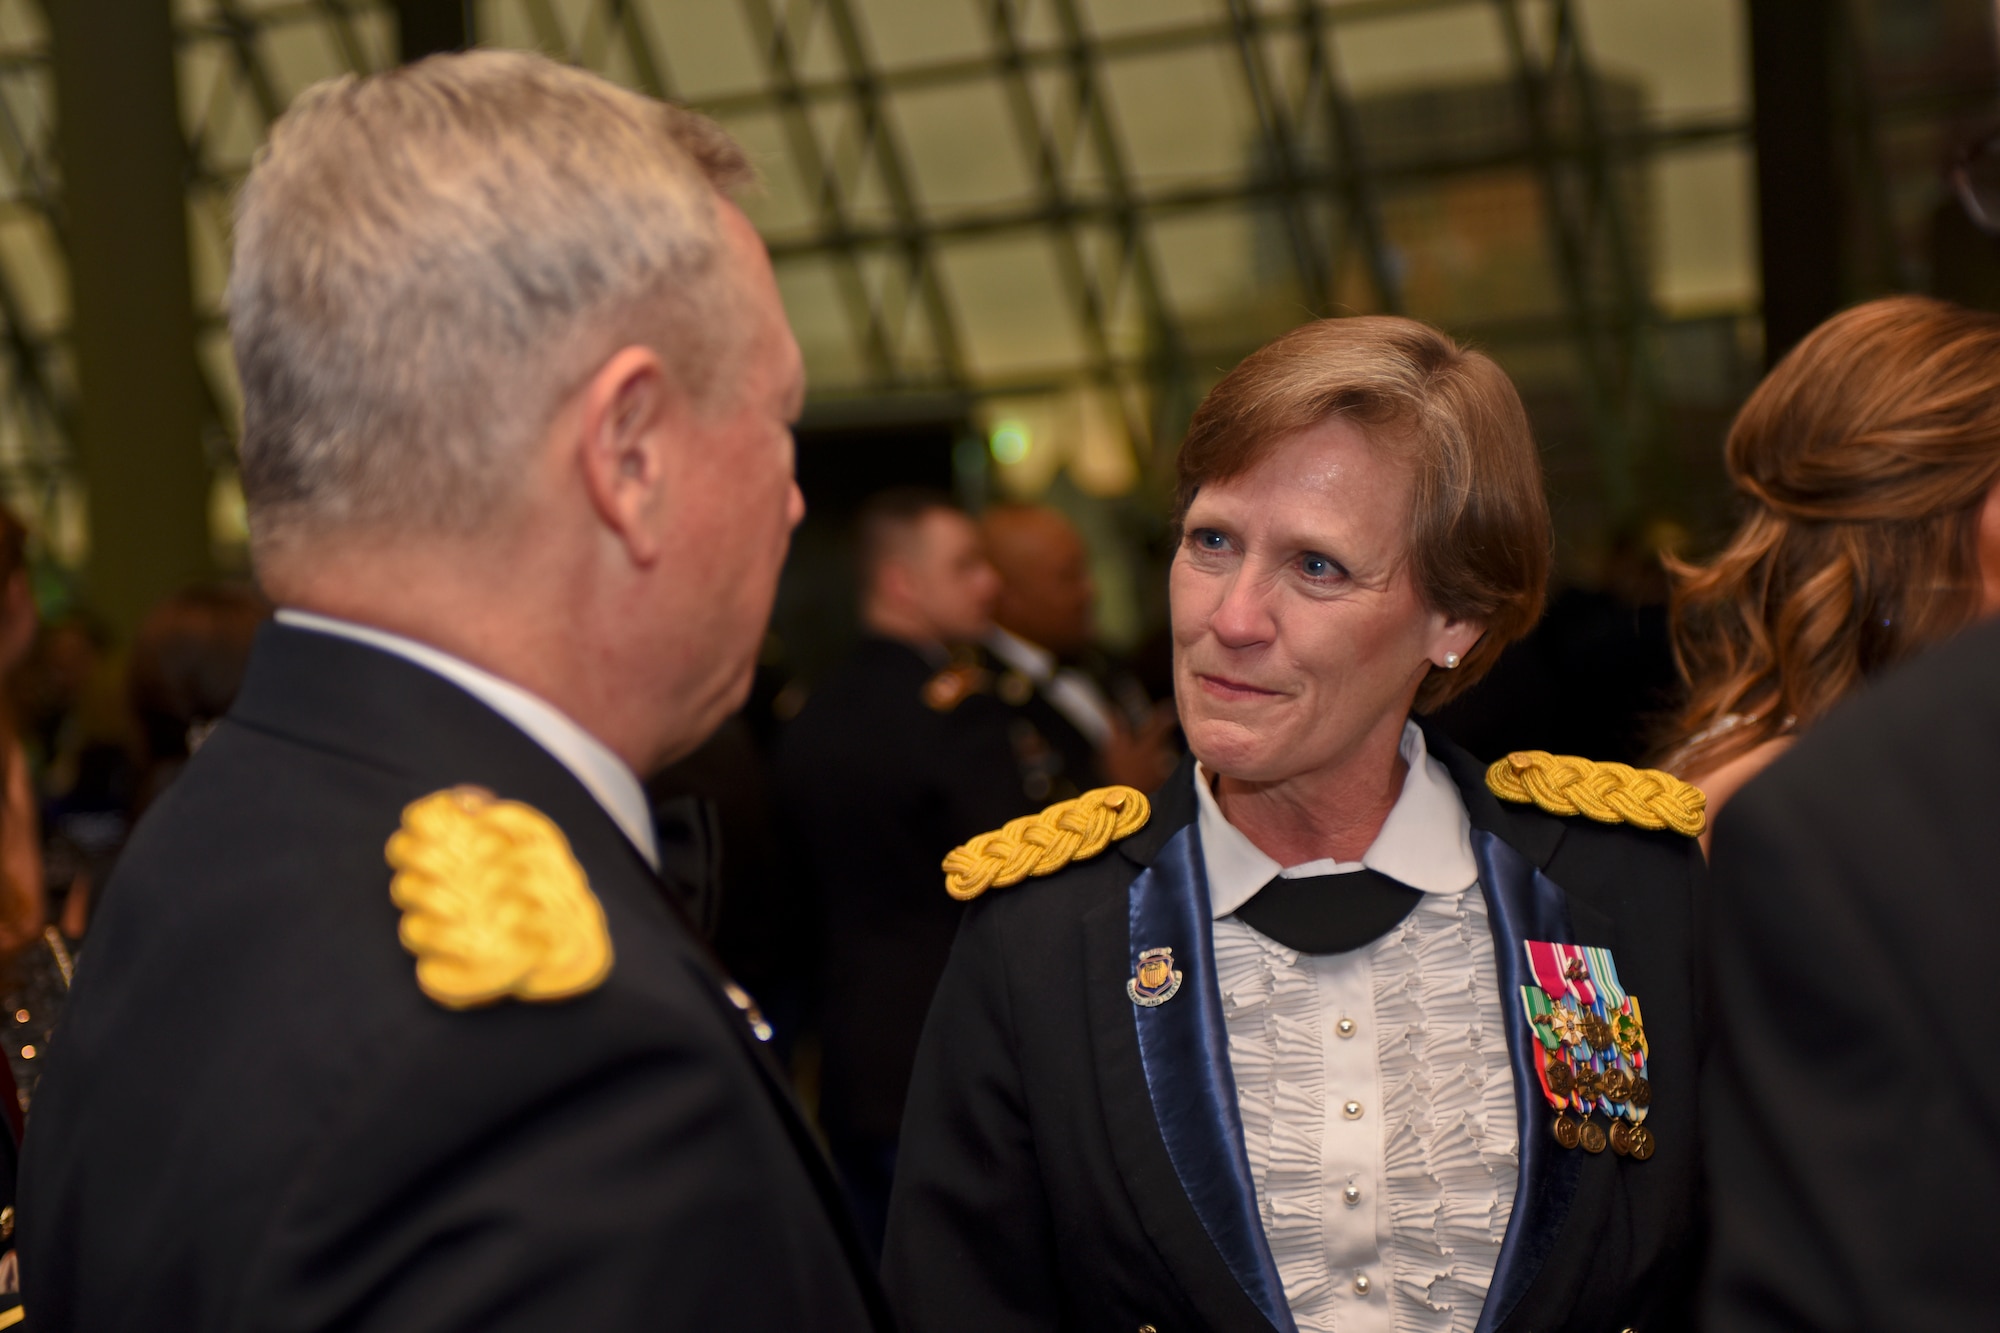 U.S. Army Gen. Frank J. Grass (left), Chief of the National Guard Bureau, speaks with Maj. Gen. Deborah Ashenhurst (right), special assistant to the vice chief, National Guard Bureau, prior to the Ohio National Guard Association and Ohio National Guard Enlisted Association Spring Dinner Dance, Columbus, Ohio, April 25, 2015. Gen. Grass was the guest speaker at the event which is held annually for association members in both the Air and Army National Guard. (U.S. National Guard photo by Senior Airman Wendy Kuhn/Released)